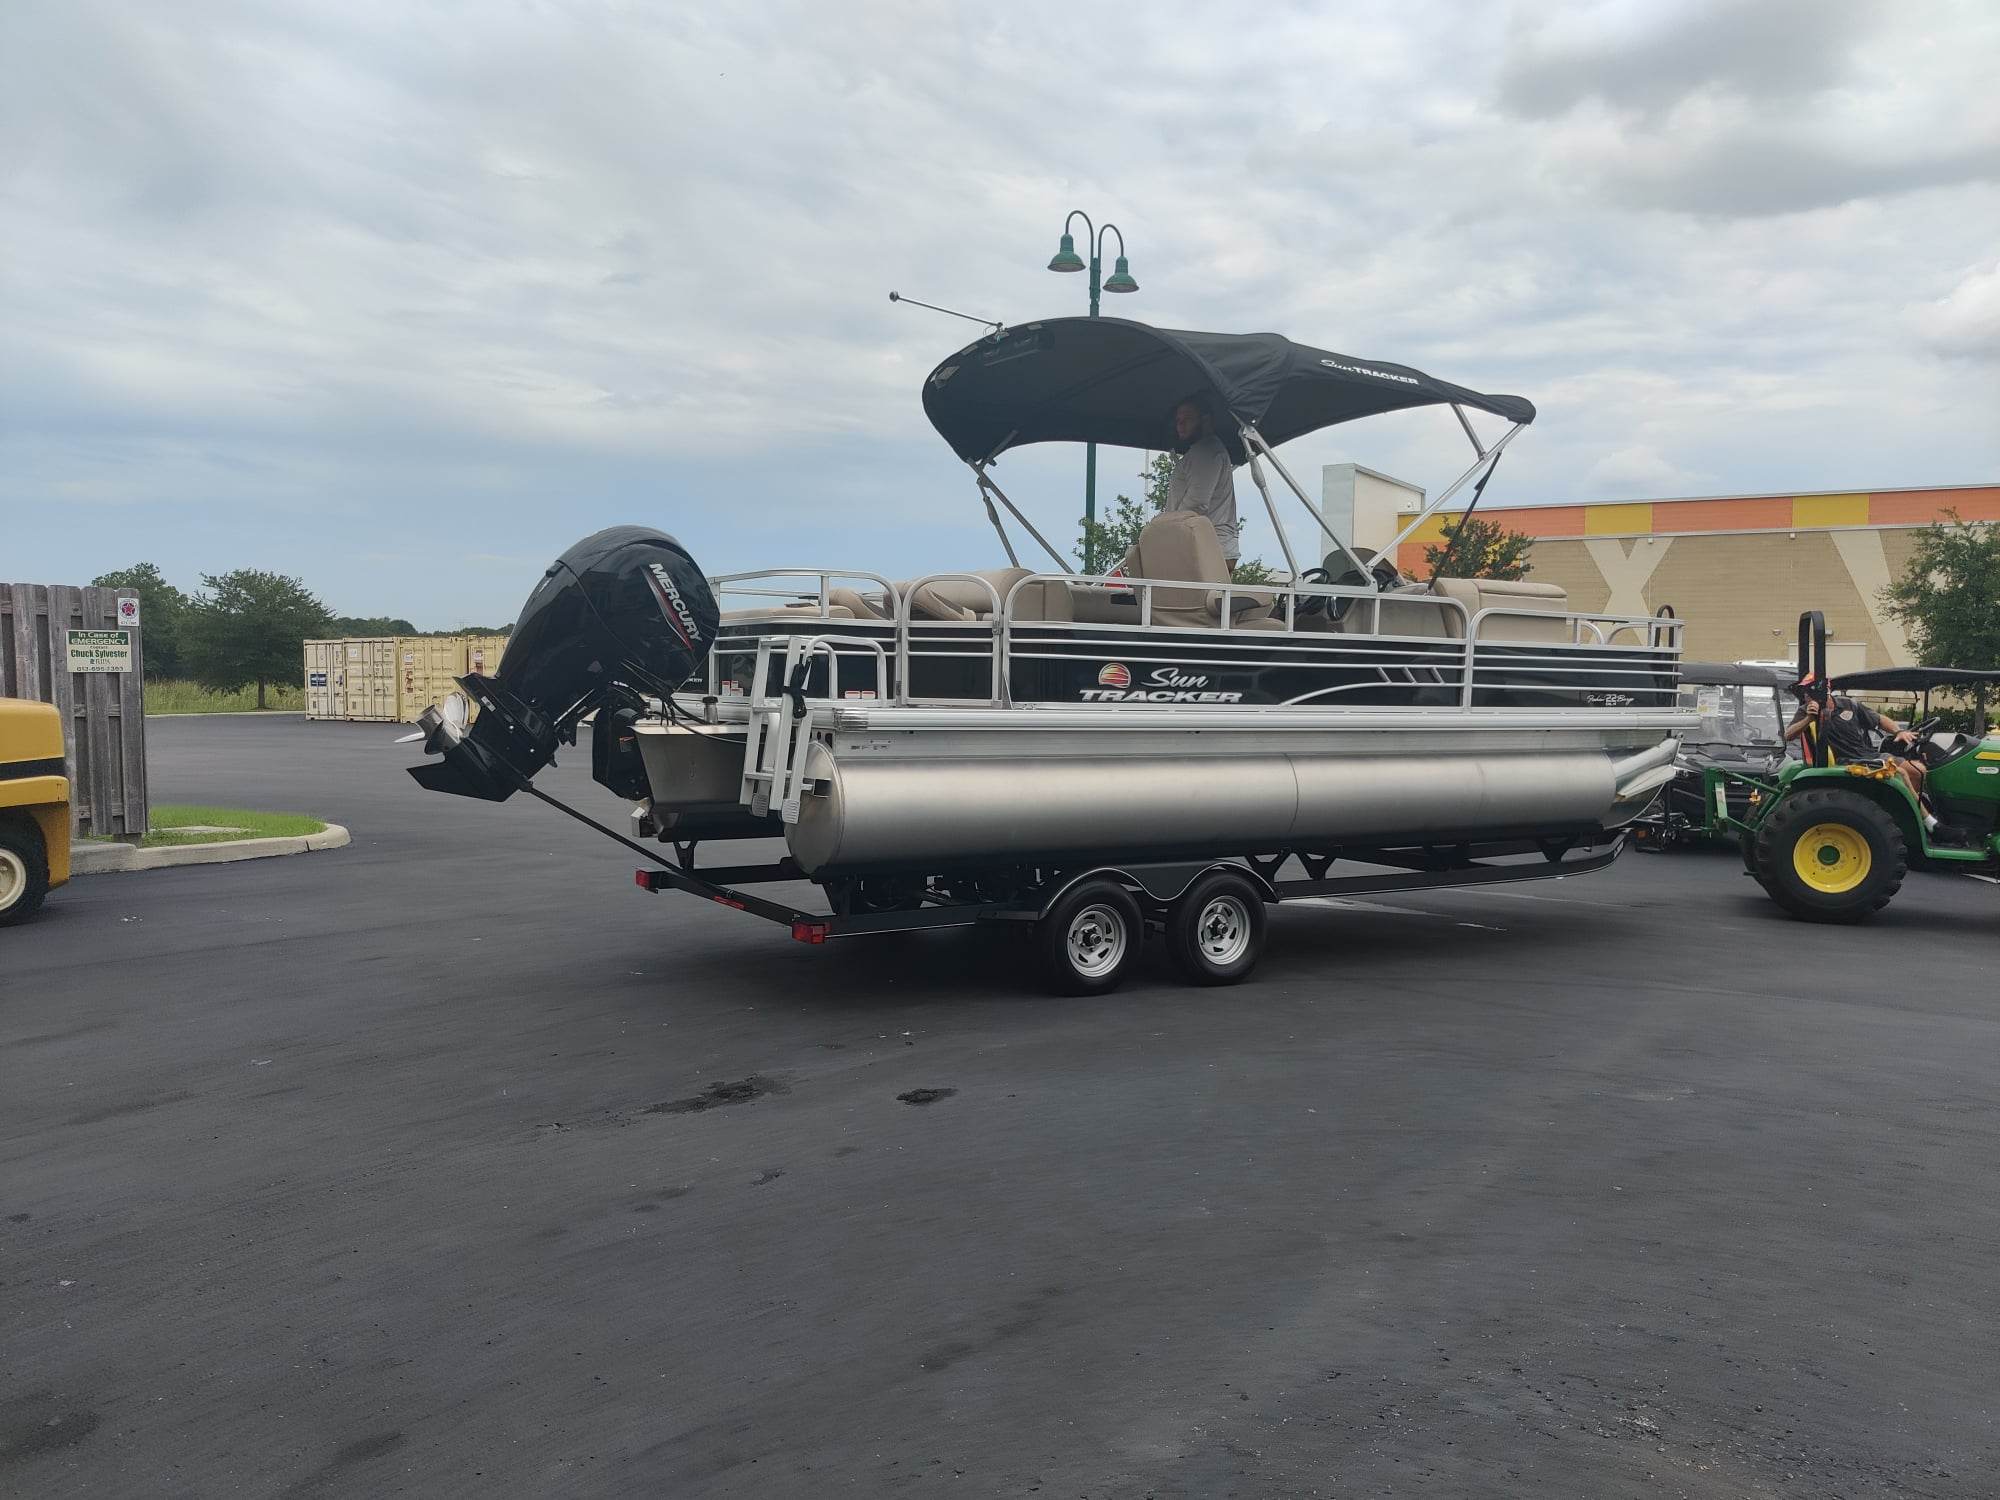 2020 Sun Tracker Fishin' Barge 22 DLX Fishing boat for sale in St Petersburg, FL - image 1 